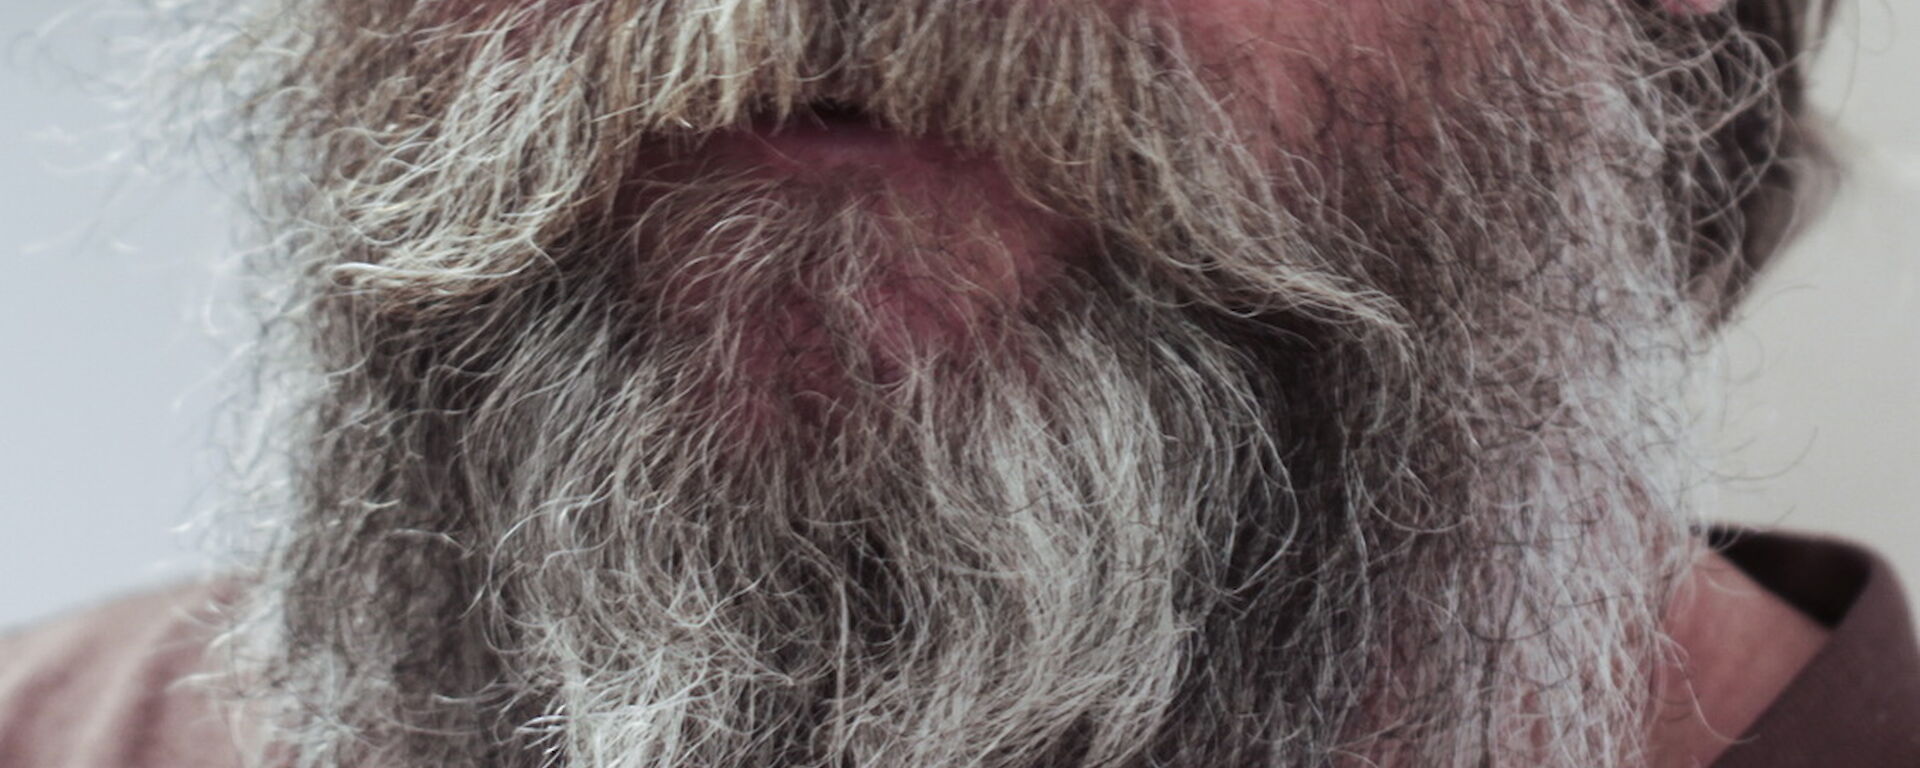 Photo of a man’s face form the nose down with a white and grey-haired beard.